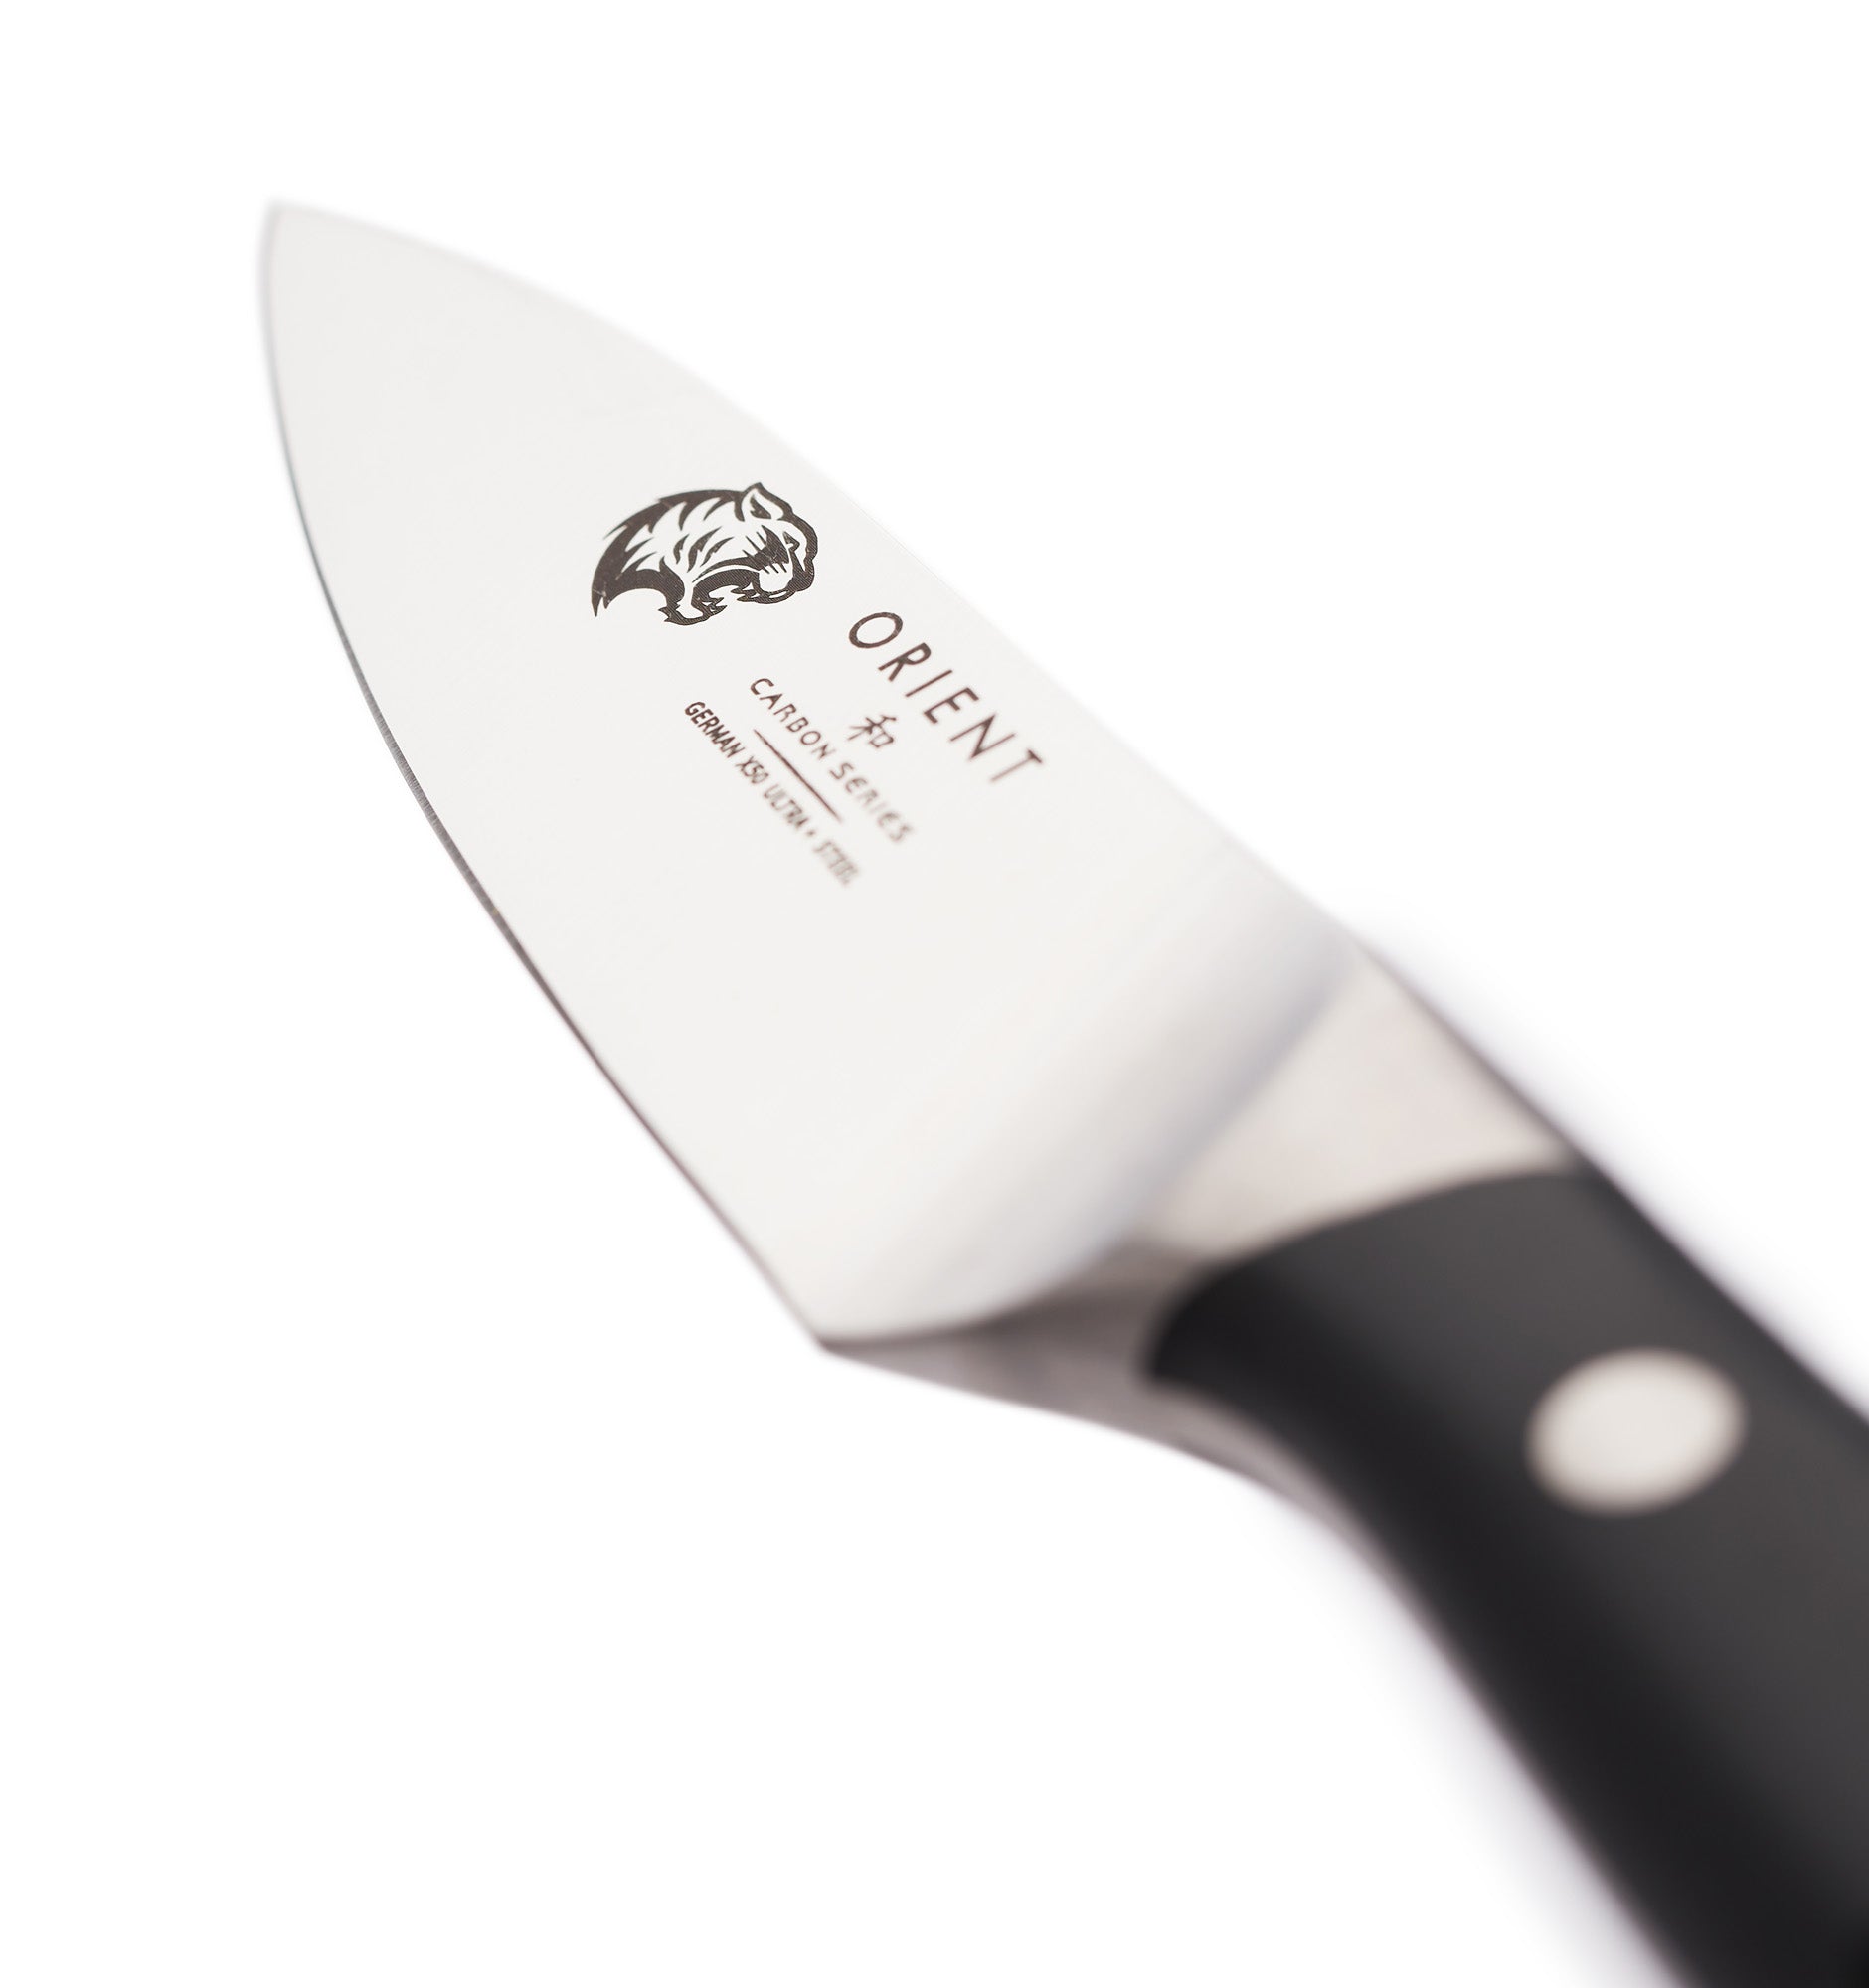 5 inch Steak Knives (Non-Serrated) - Carbon Series - Set of 4 – Orient  Knives